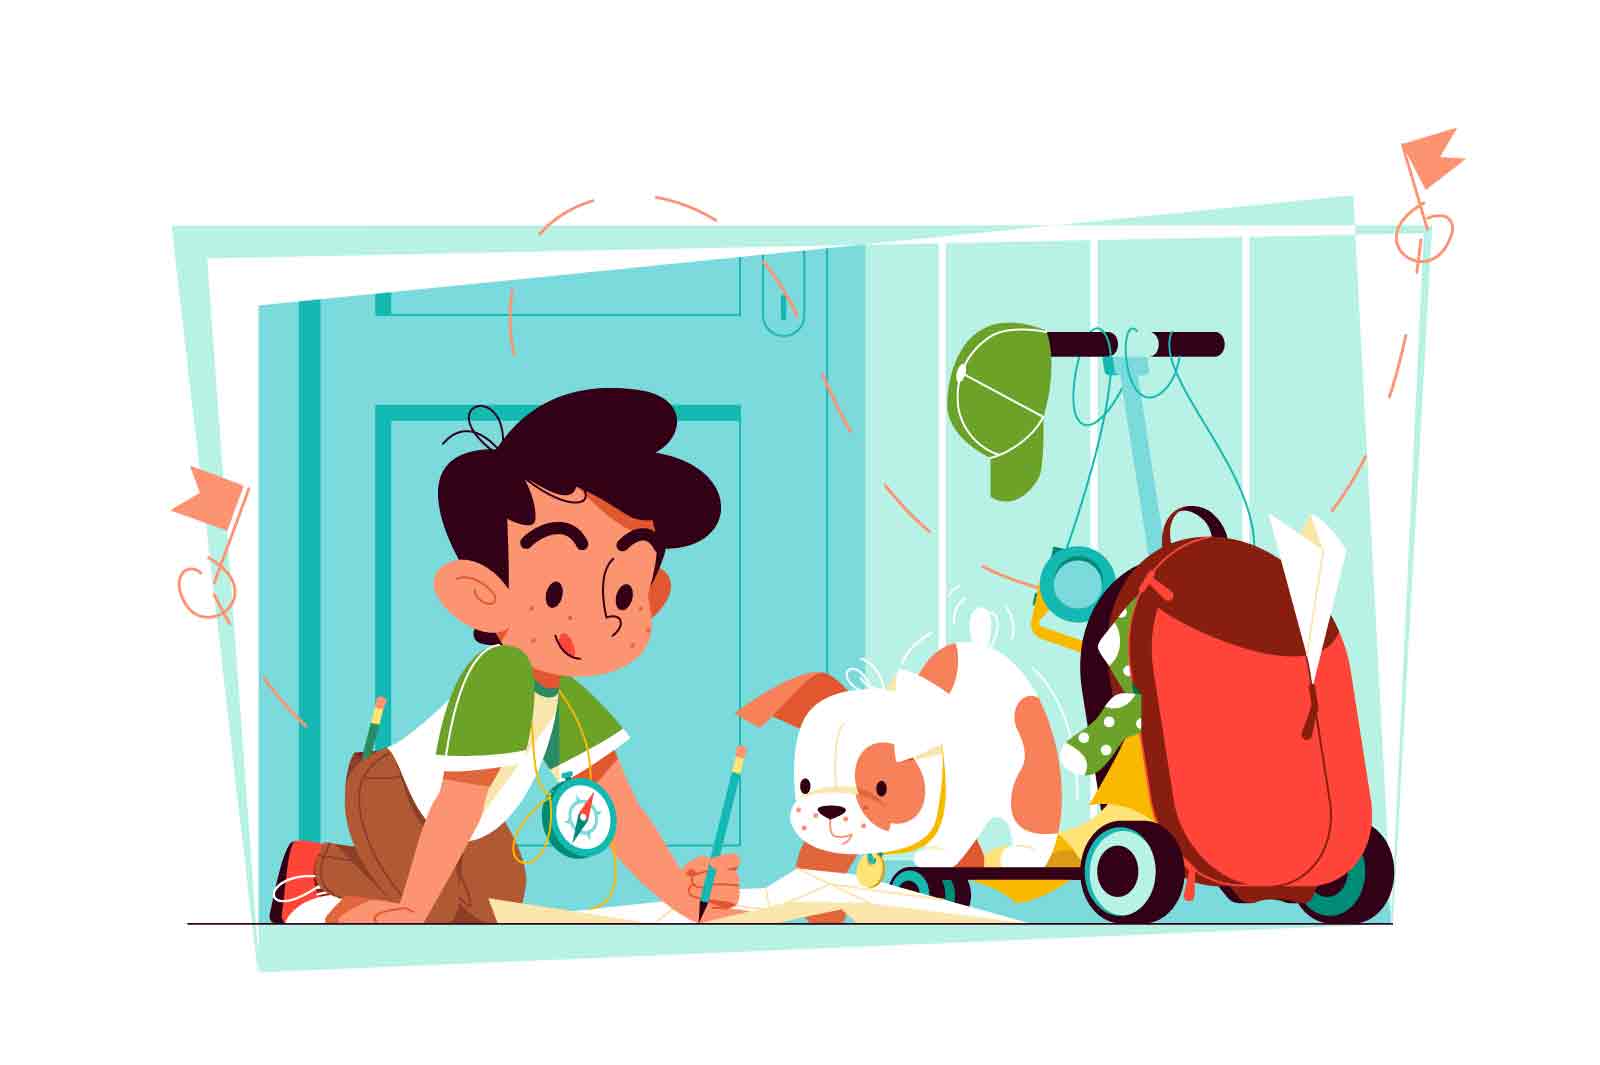 Young boy traveler paint with dog puppy in room vector illustration. Packed luggage, dream of trip flat style. Travelling, adventure concept